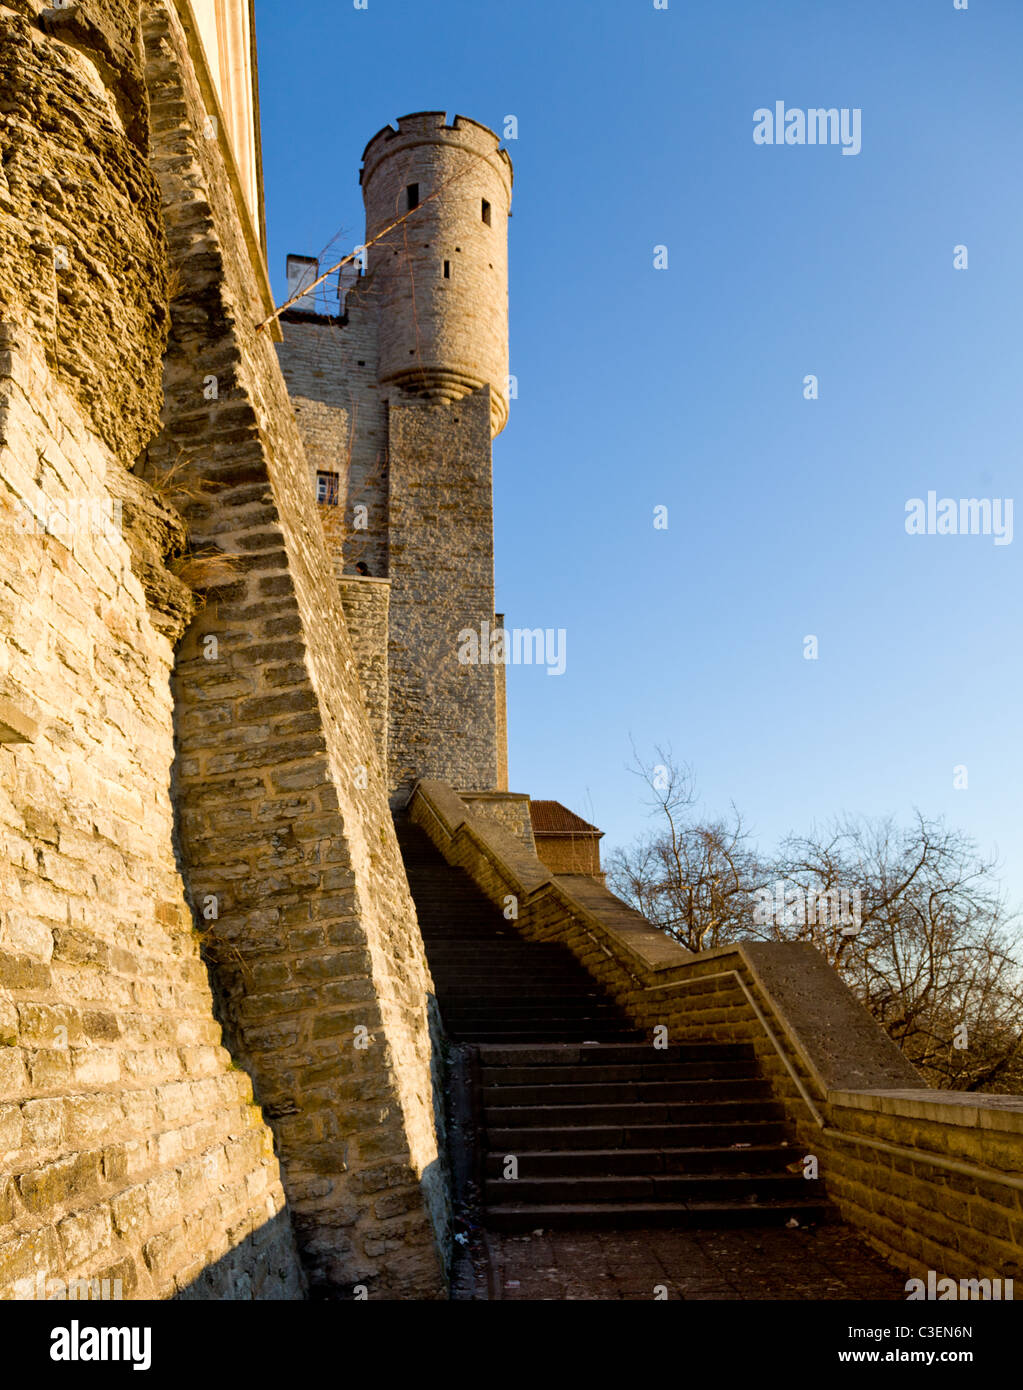 Capital of Estonia, Tallinn is famous for its World Heritage old town walls and cobbled streets. The old town is surrounded by stone walls and battlements Stock Photo